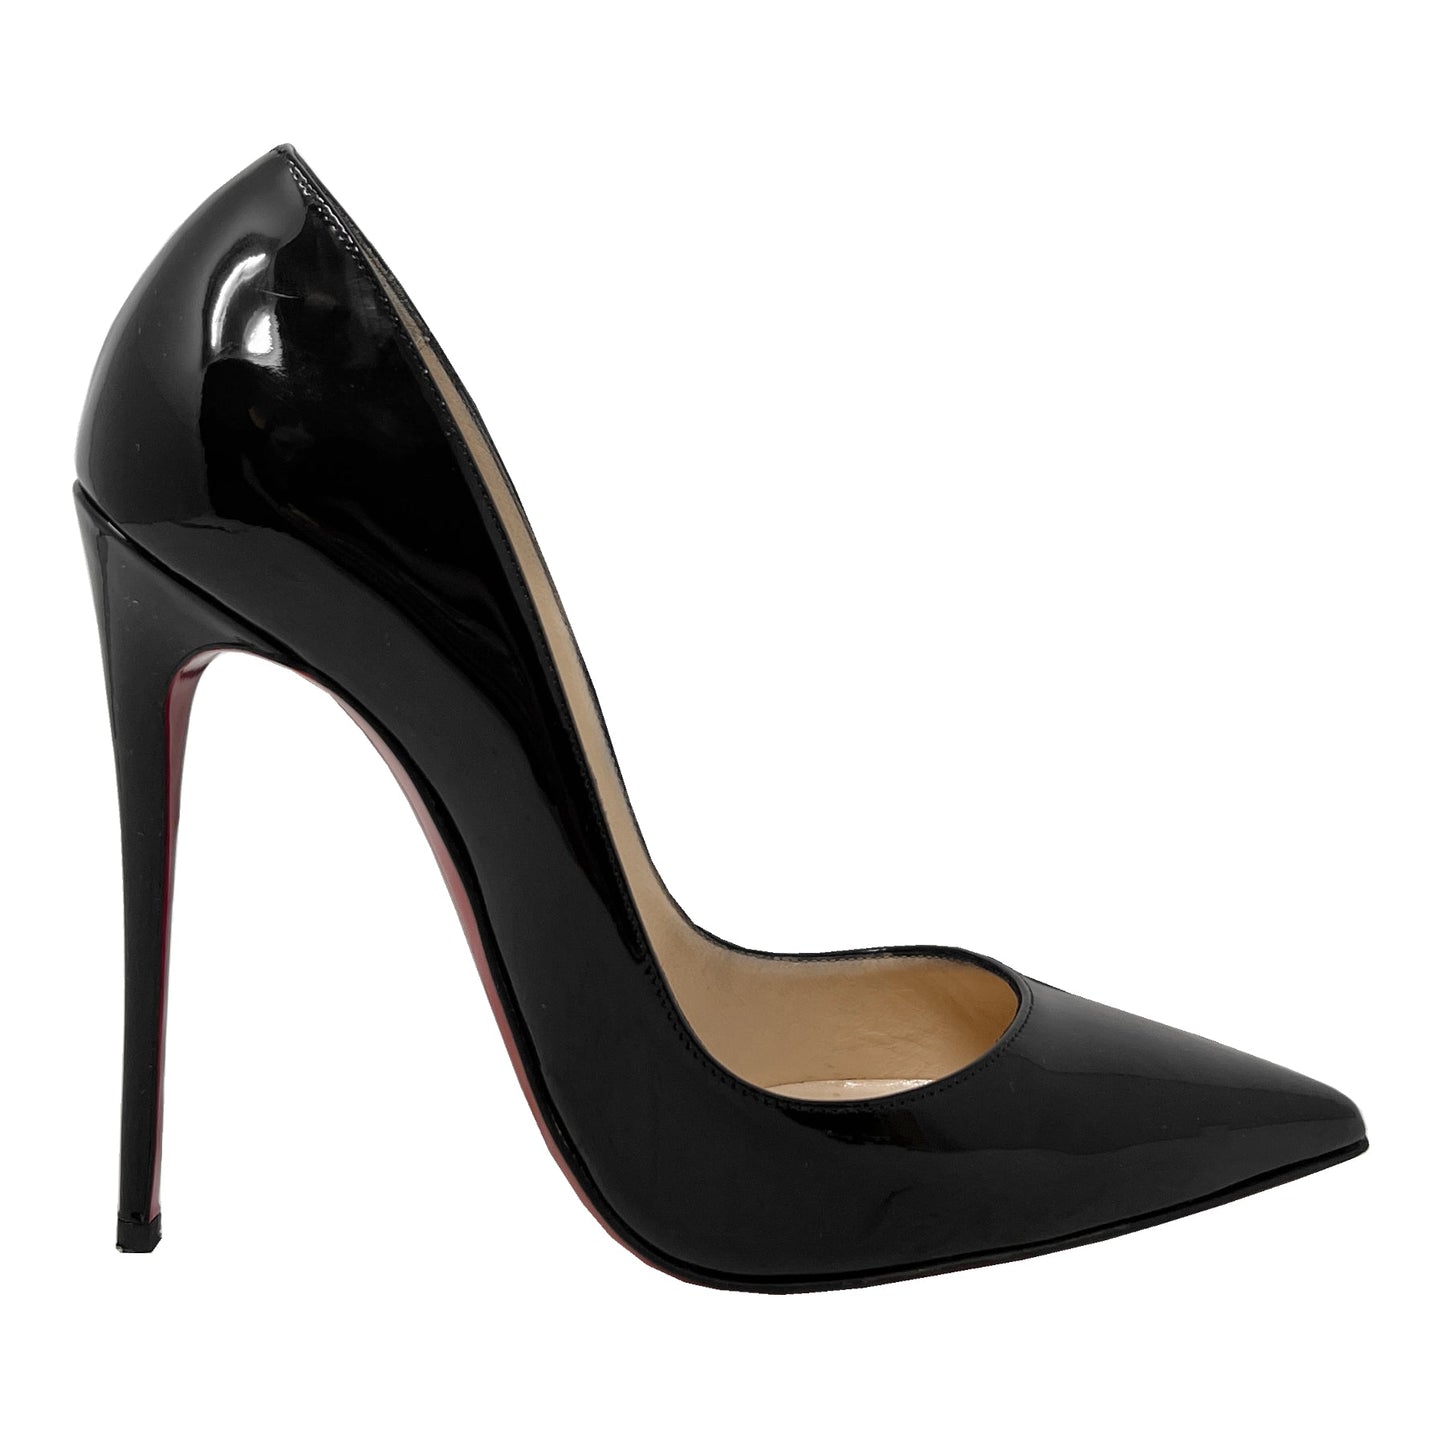 Christian Louboutin So Kate 120 Black Patent Leather Pointed Toe Stiletto Pumps